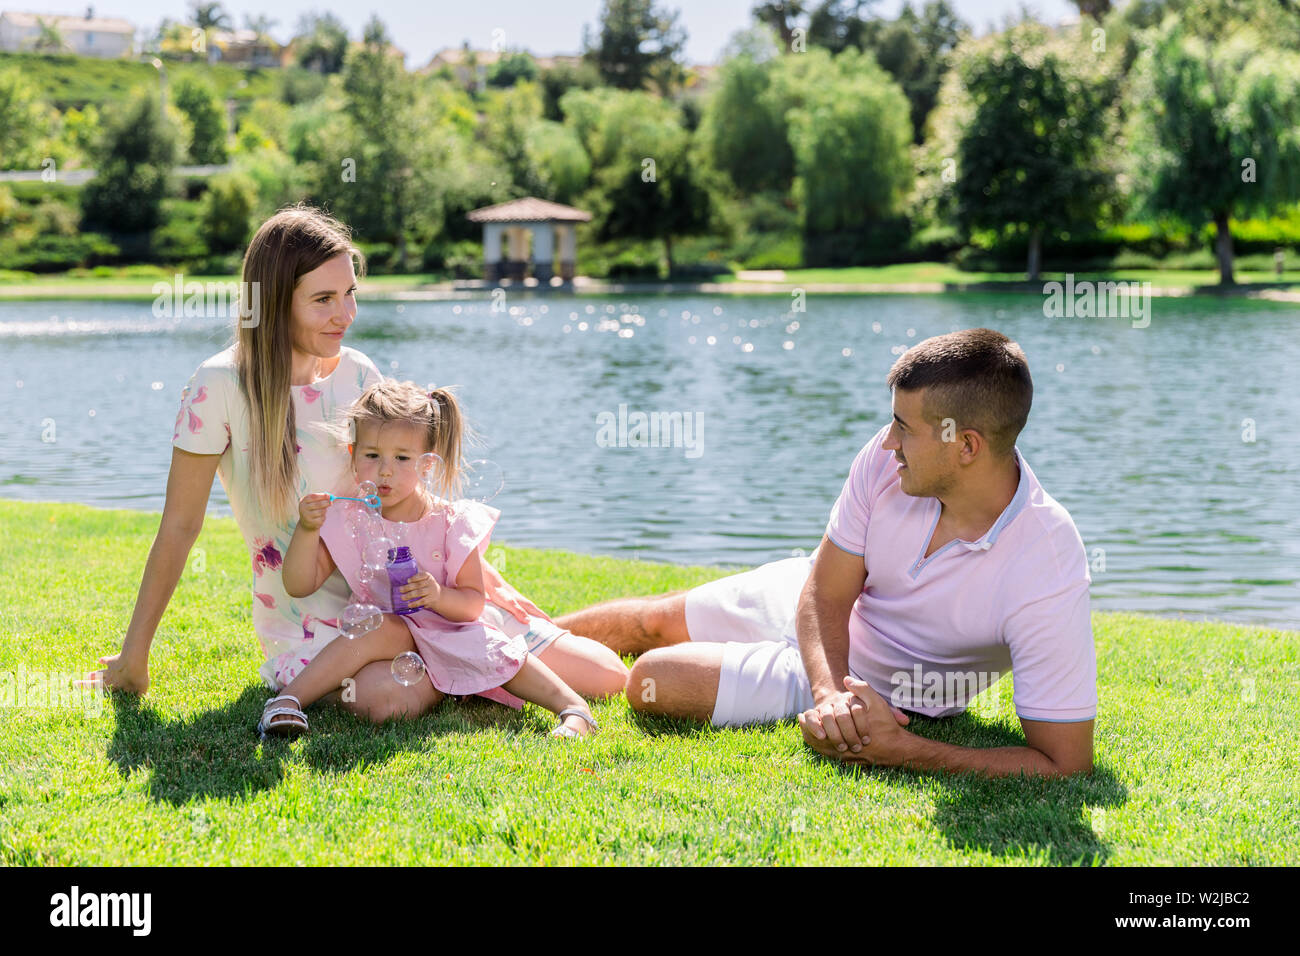 Happy family at the park having a good time together Stock Photo